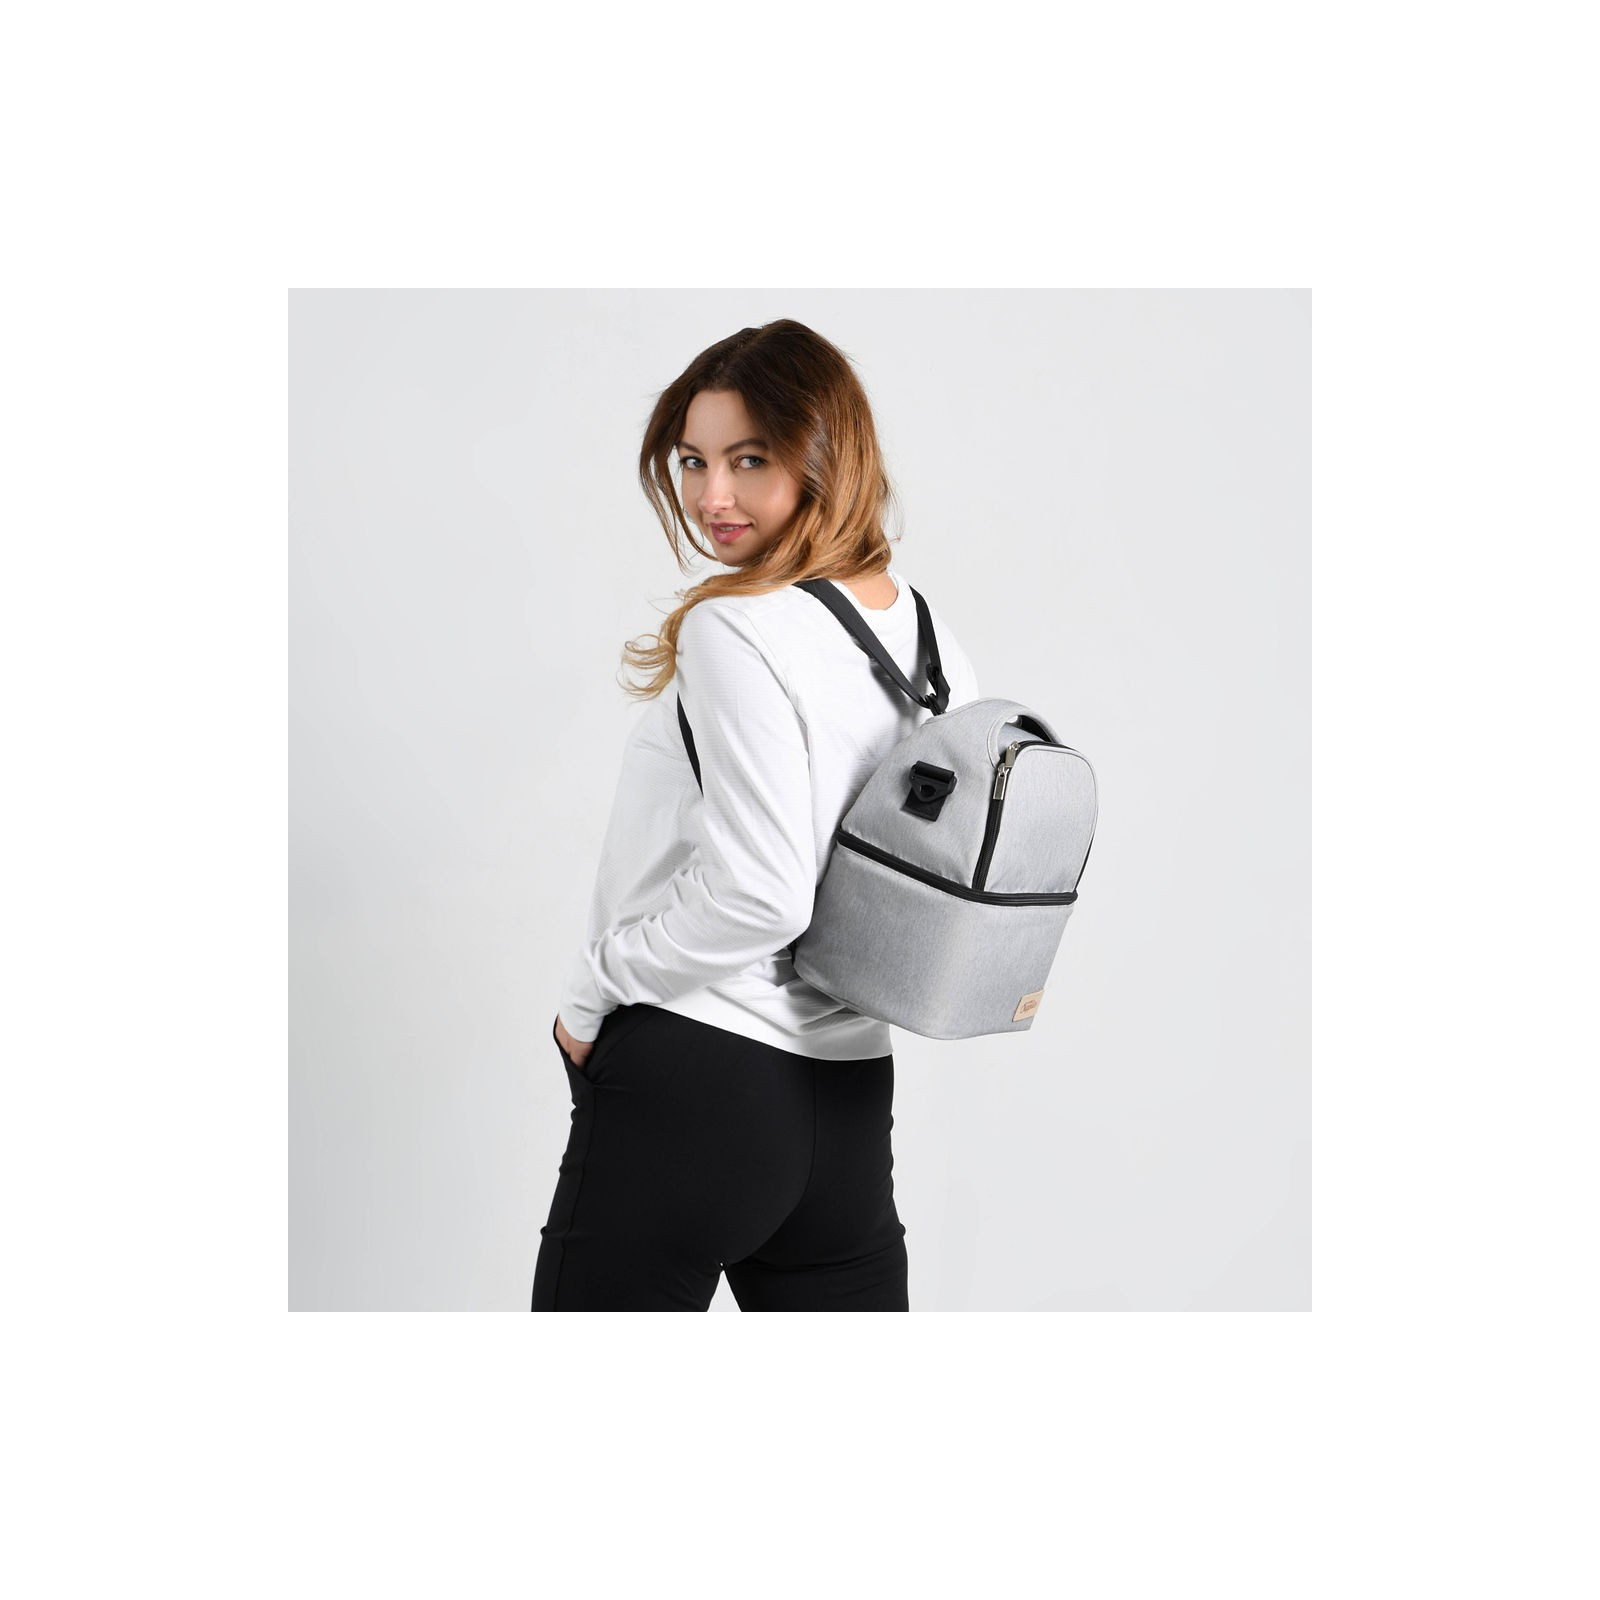  Damero Breast Pump Bag Compatible with Elvie and